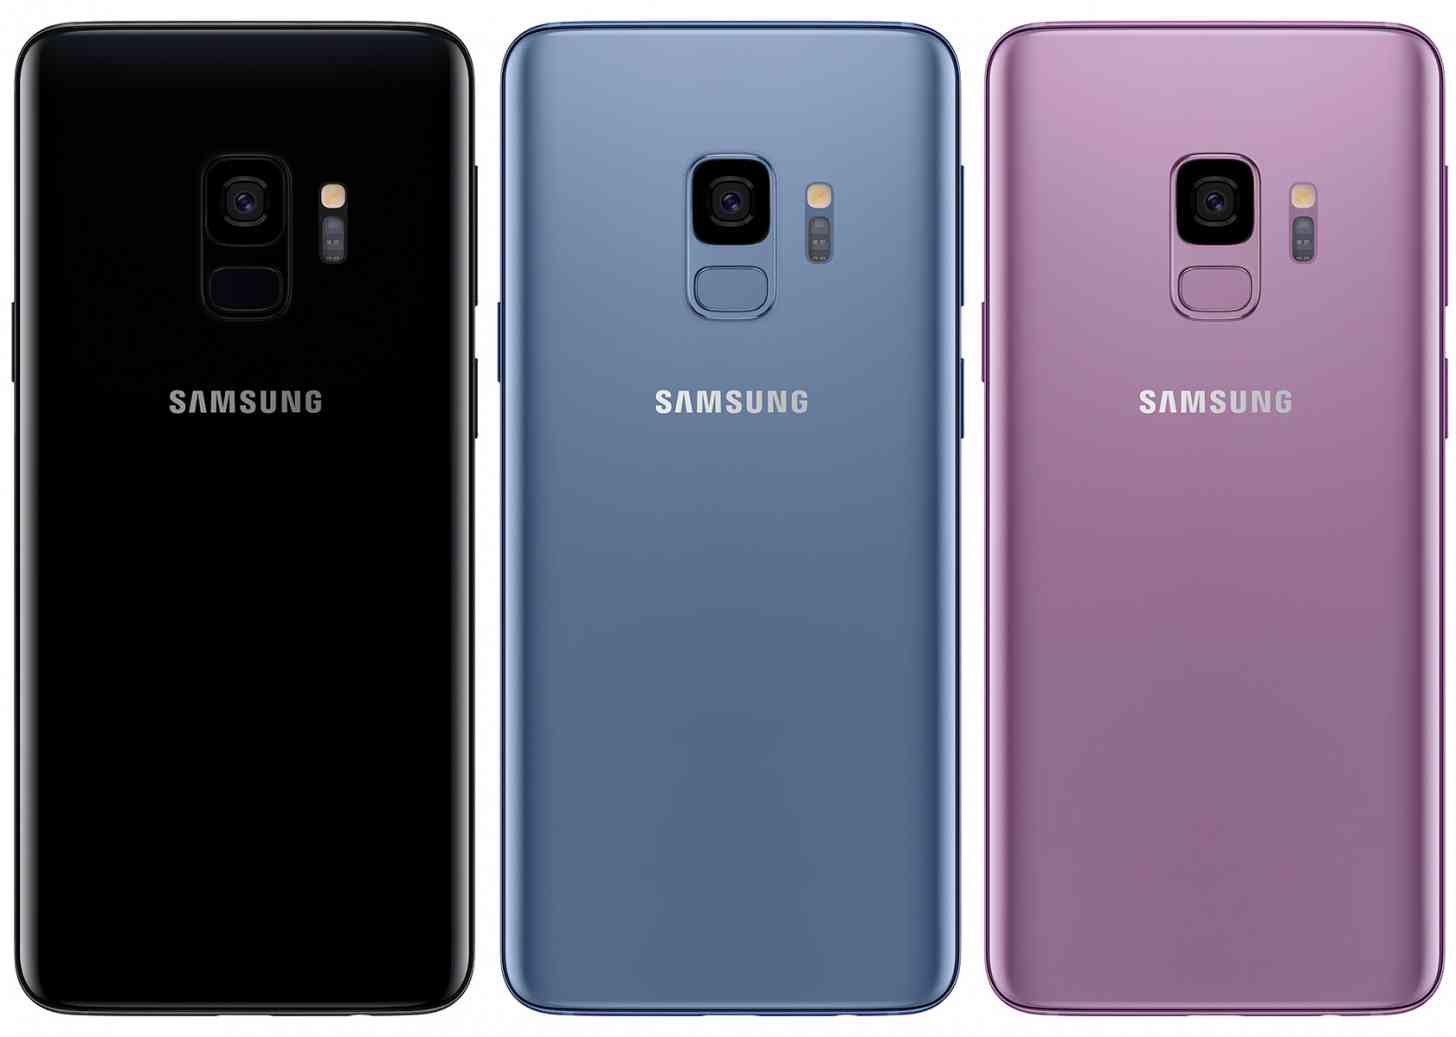 Samsung Galaxy S9 colors official